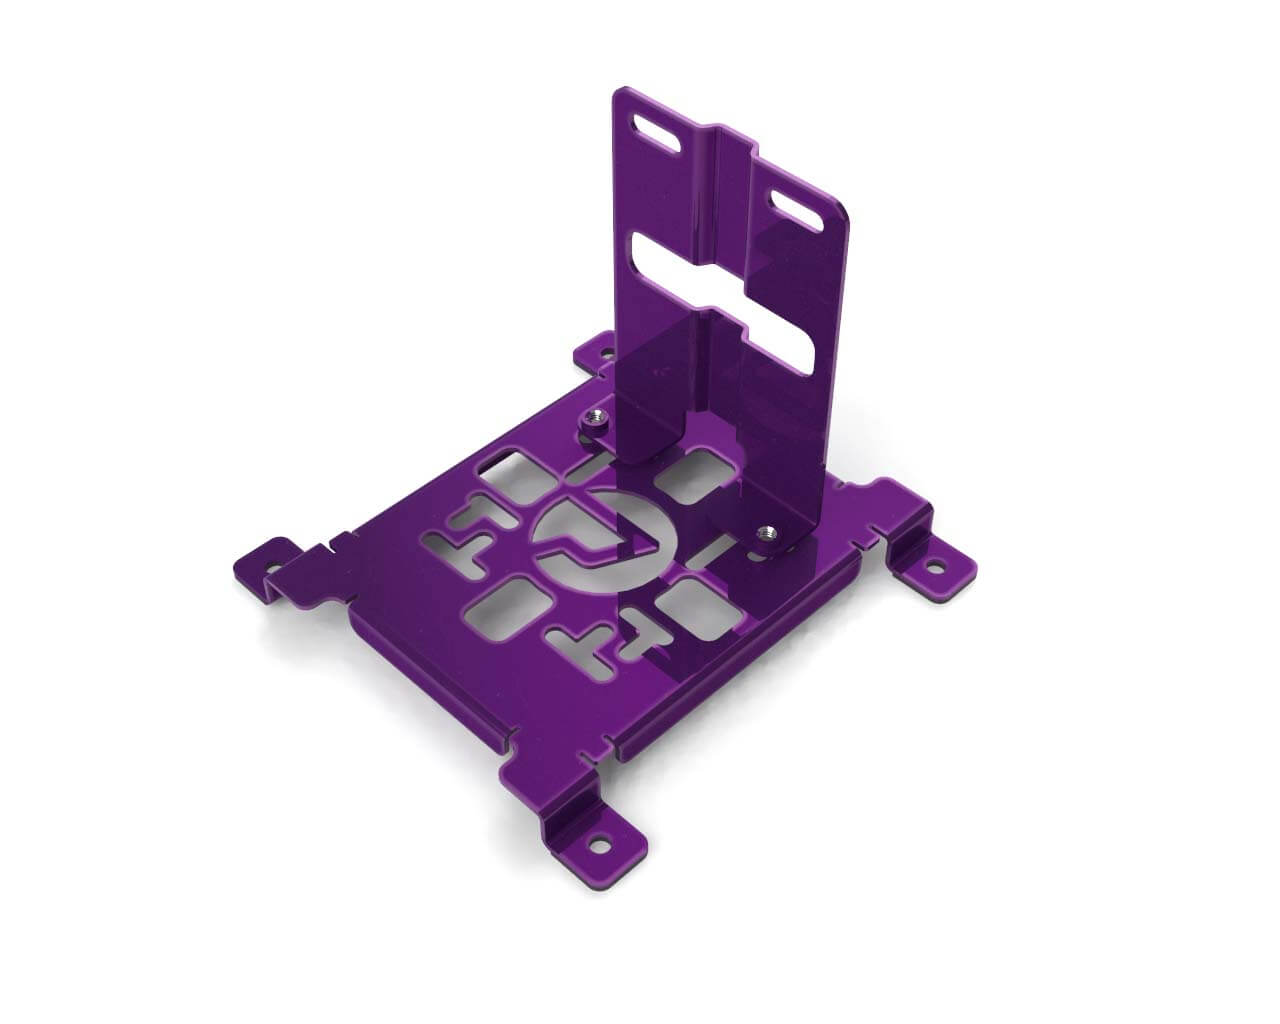 PrimoChill SX CTR2 Spider Mount Bracket Kit - 120mm Series - PrimoChill - KEEPING IT COOL Candy Purple